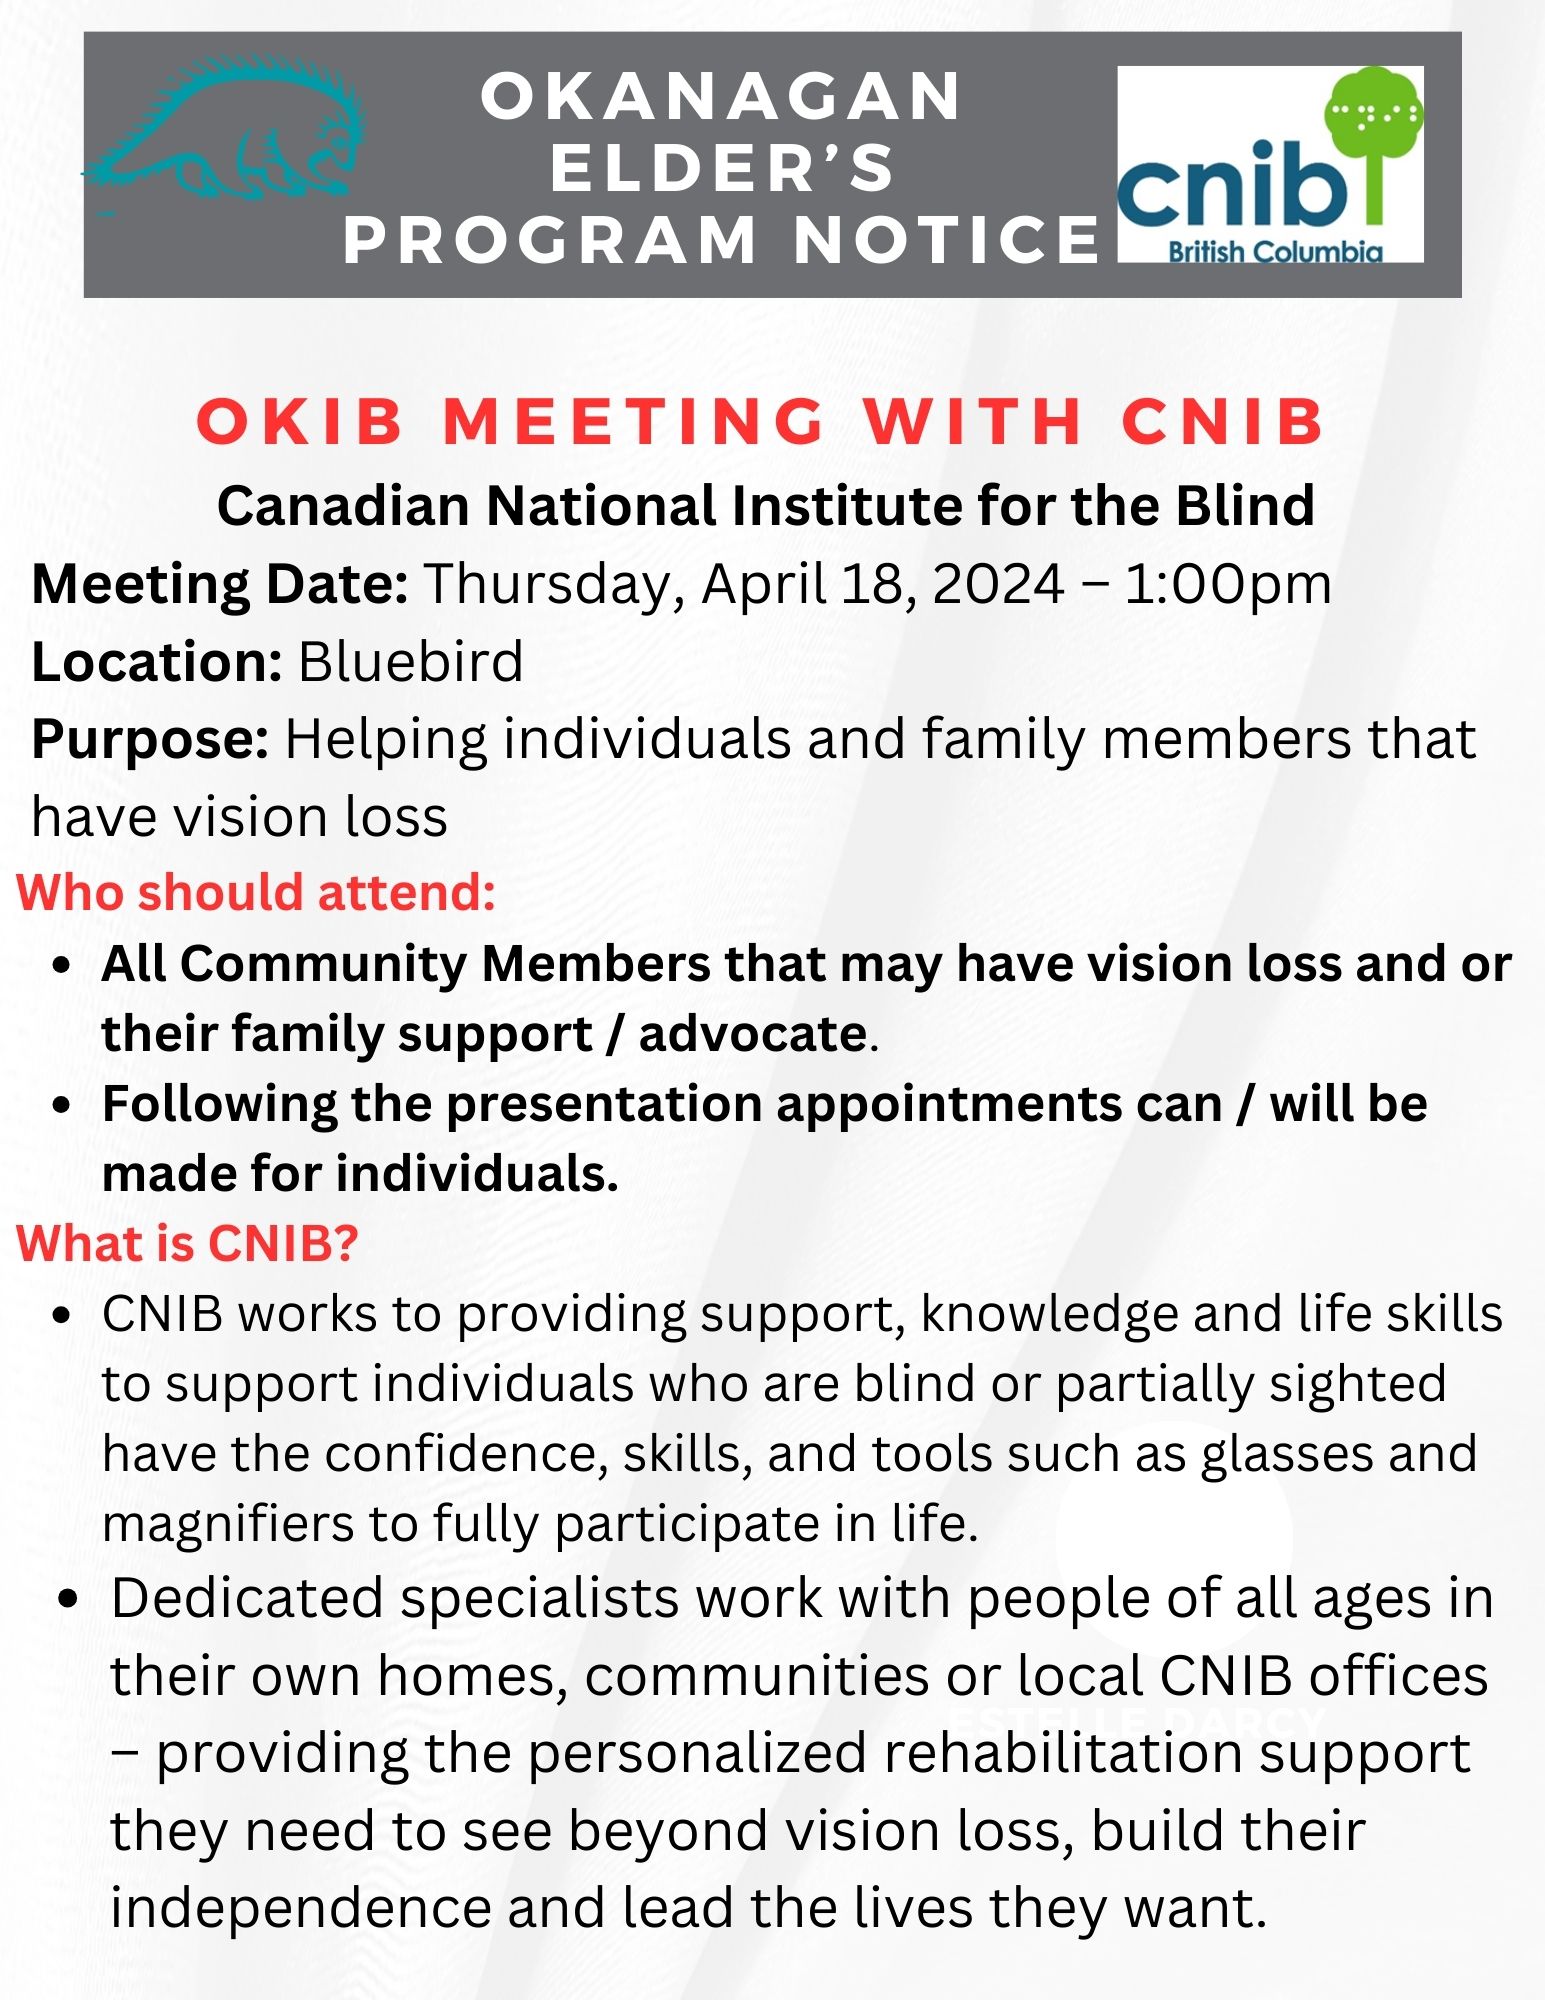 OKIB Elders Meeting with Canadian National Institute for the Blind